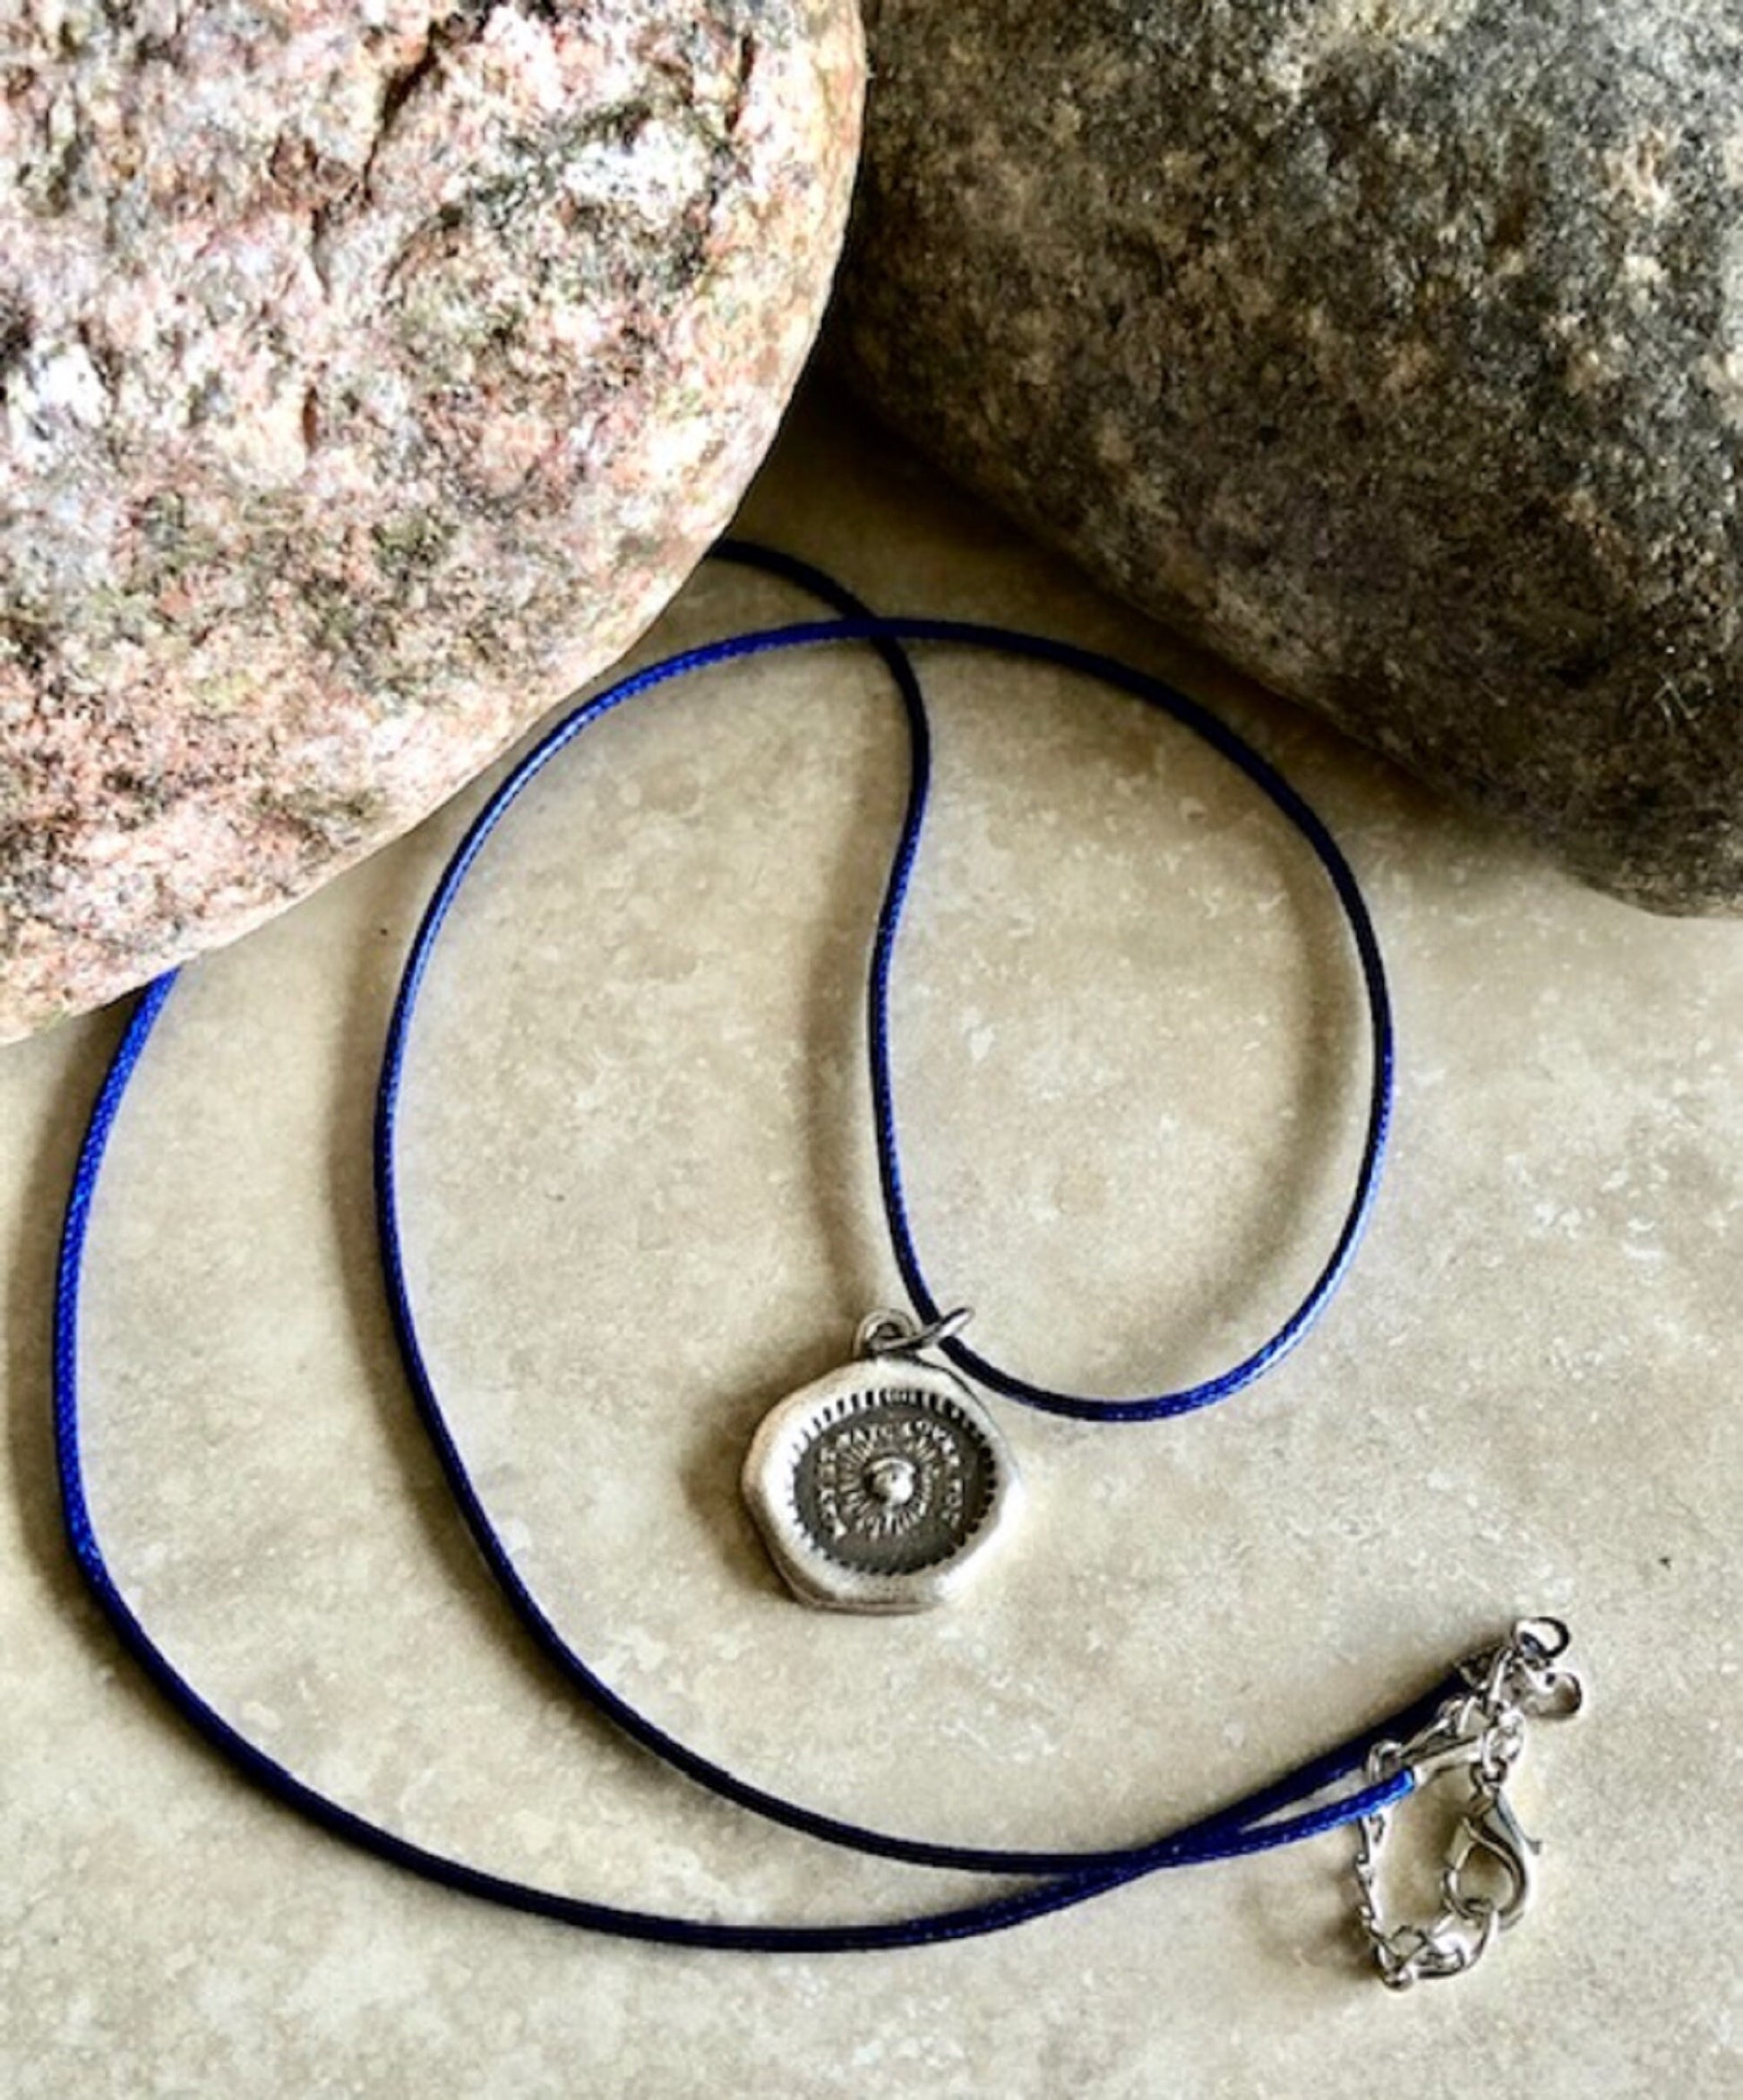 Evil Eye May It Watch Over You Silver Pendant Necklace - Protection Against Evil Jewelry From an Antique Wax Seal, Charm Fascinations 114